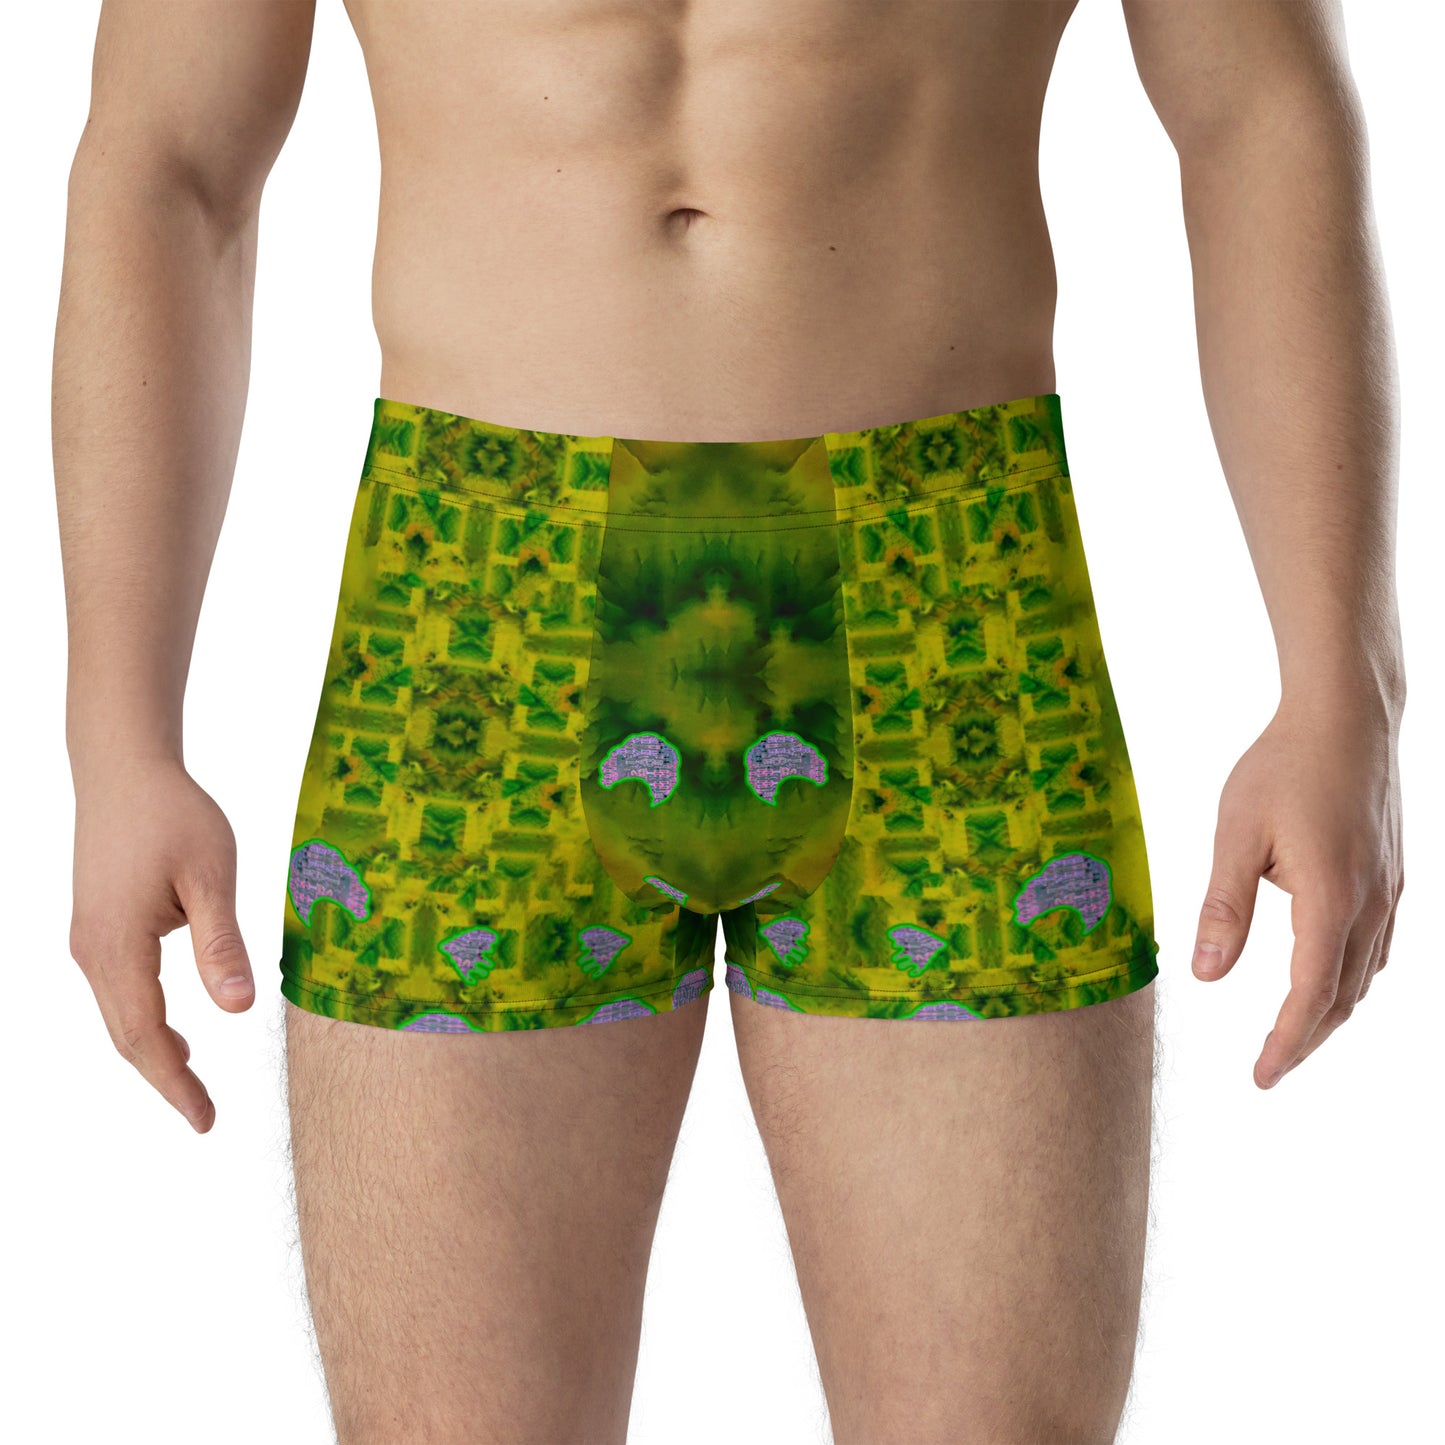 Boxer Briefs (His/They) RJSTH@Fabric#5 RJSTHW2020 RJS